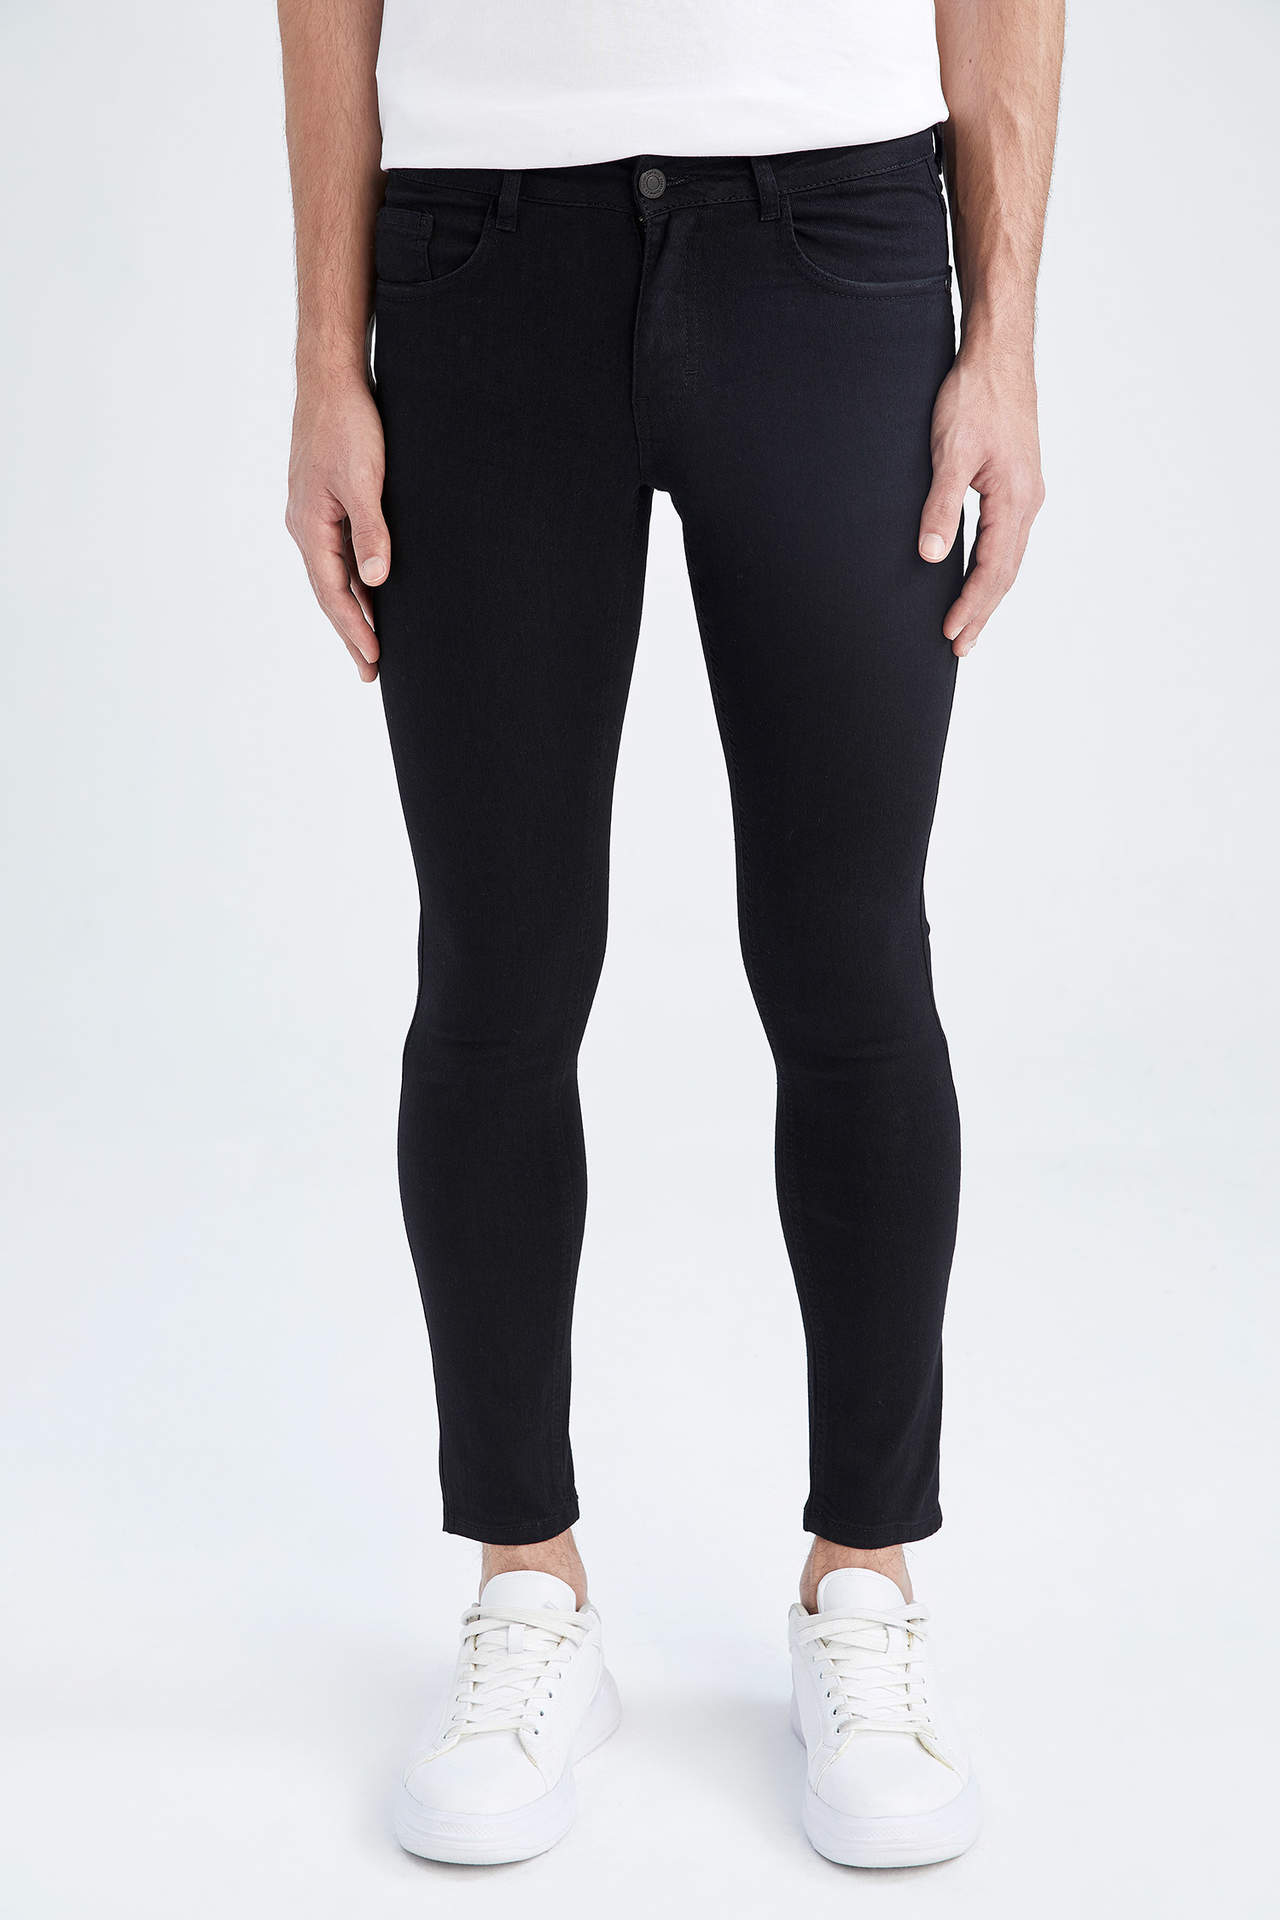 DEFACTO Carlo Skinny Fit Trousers